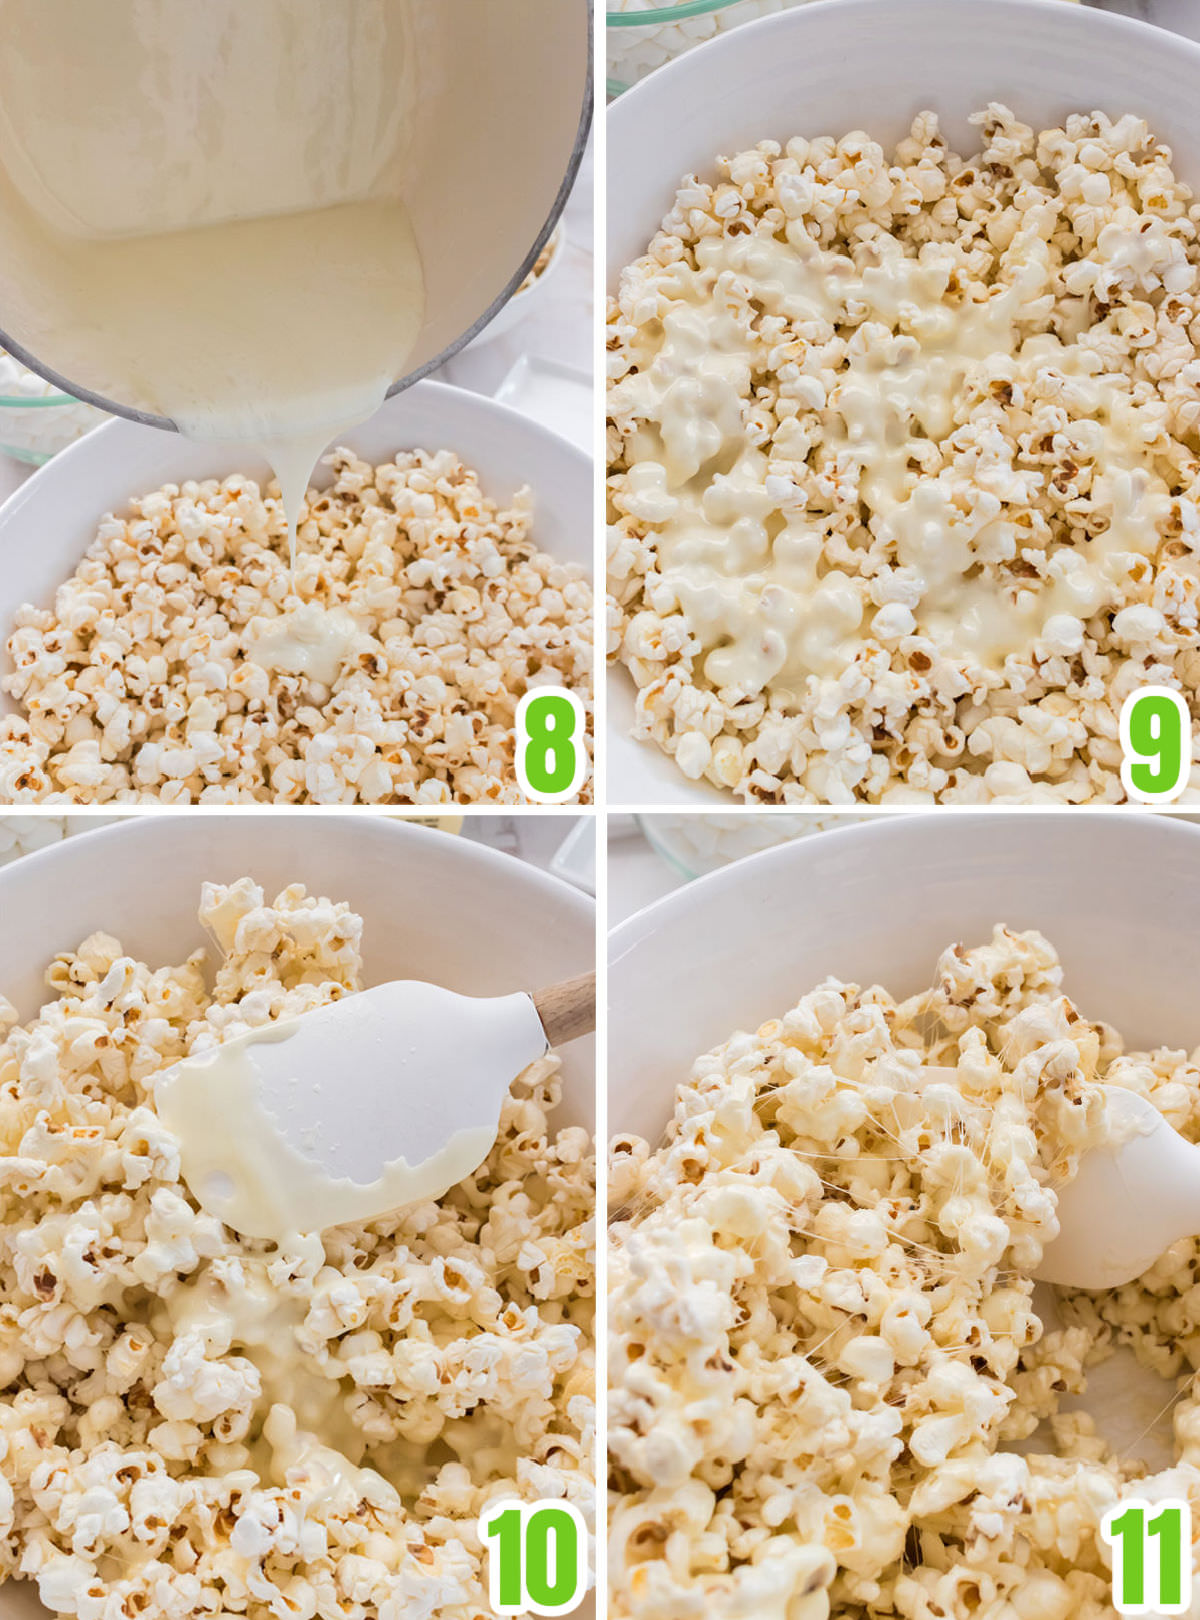 Collage image showing the steps required to make the Marshmallow Popcorn.